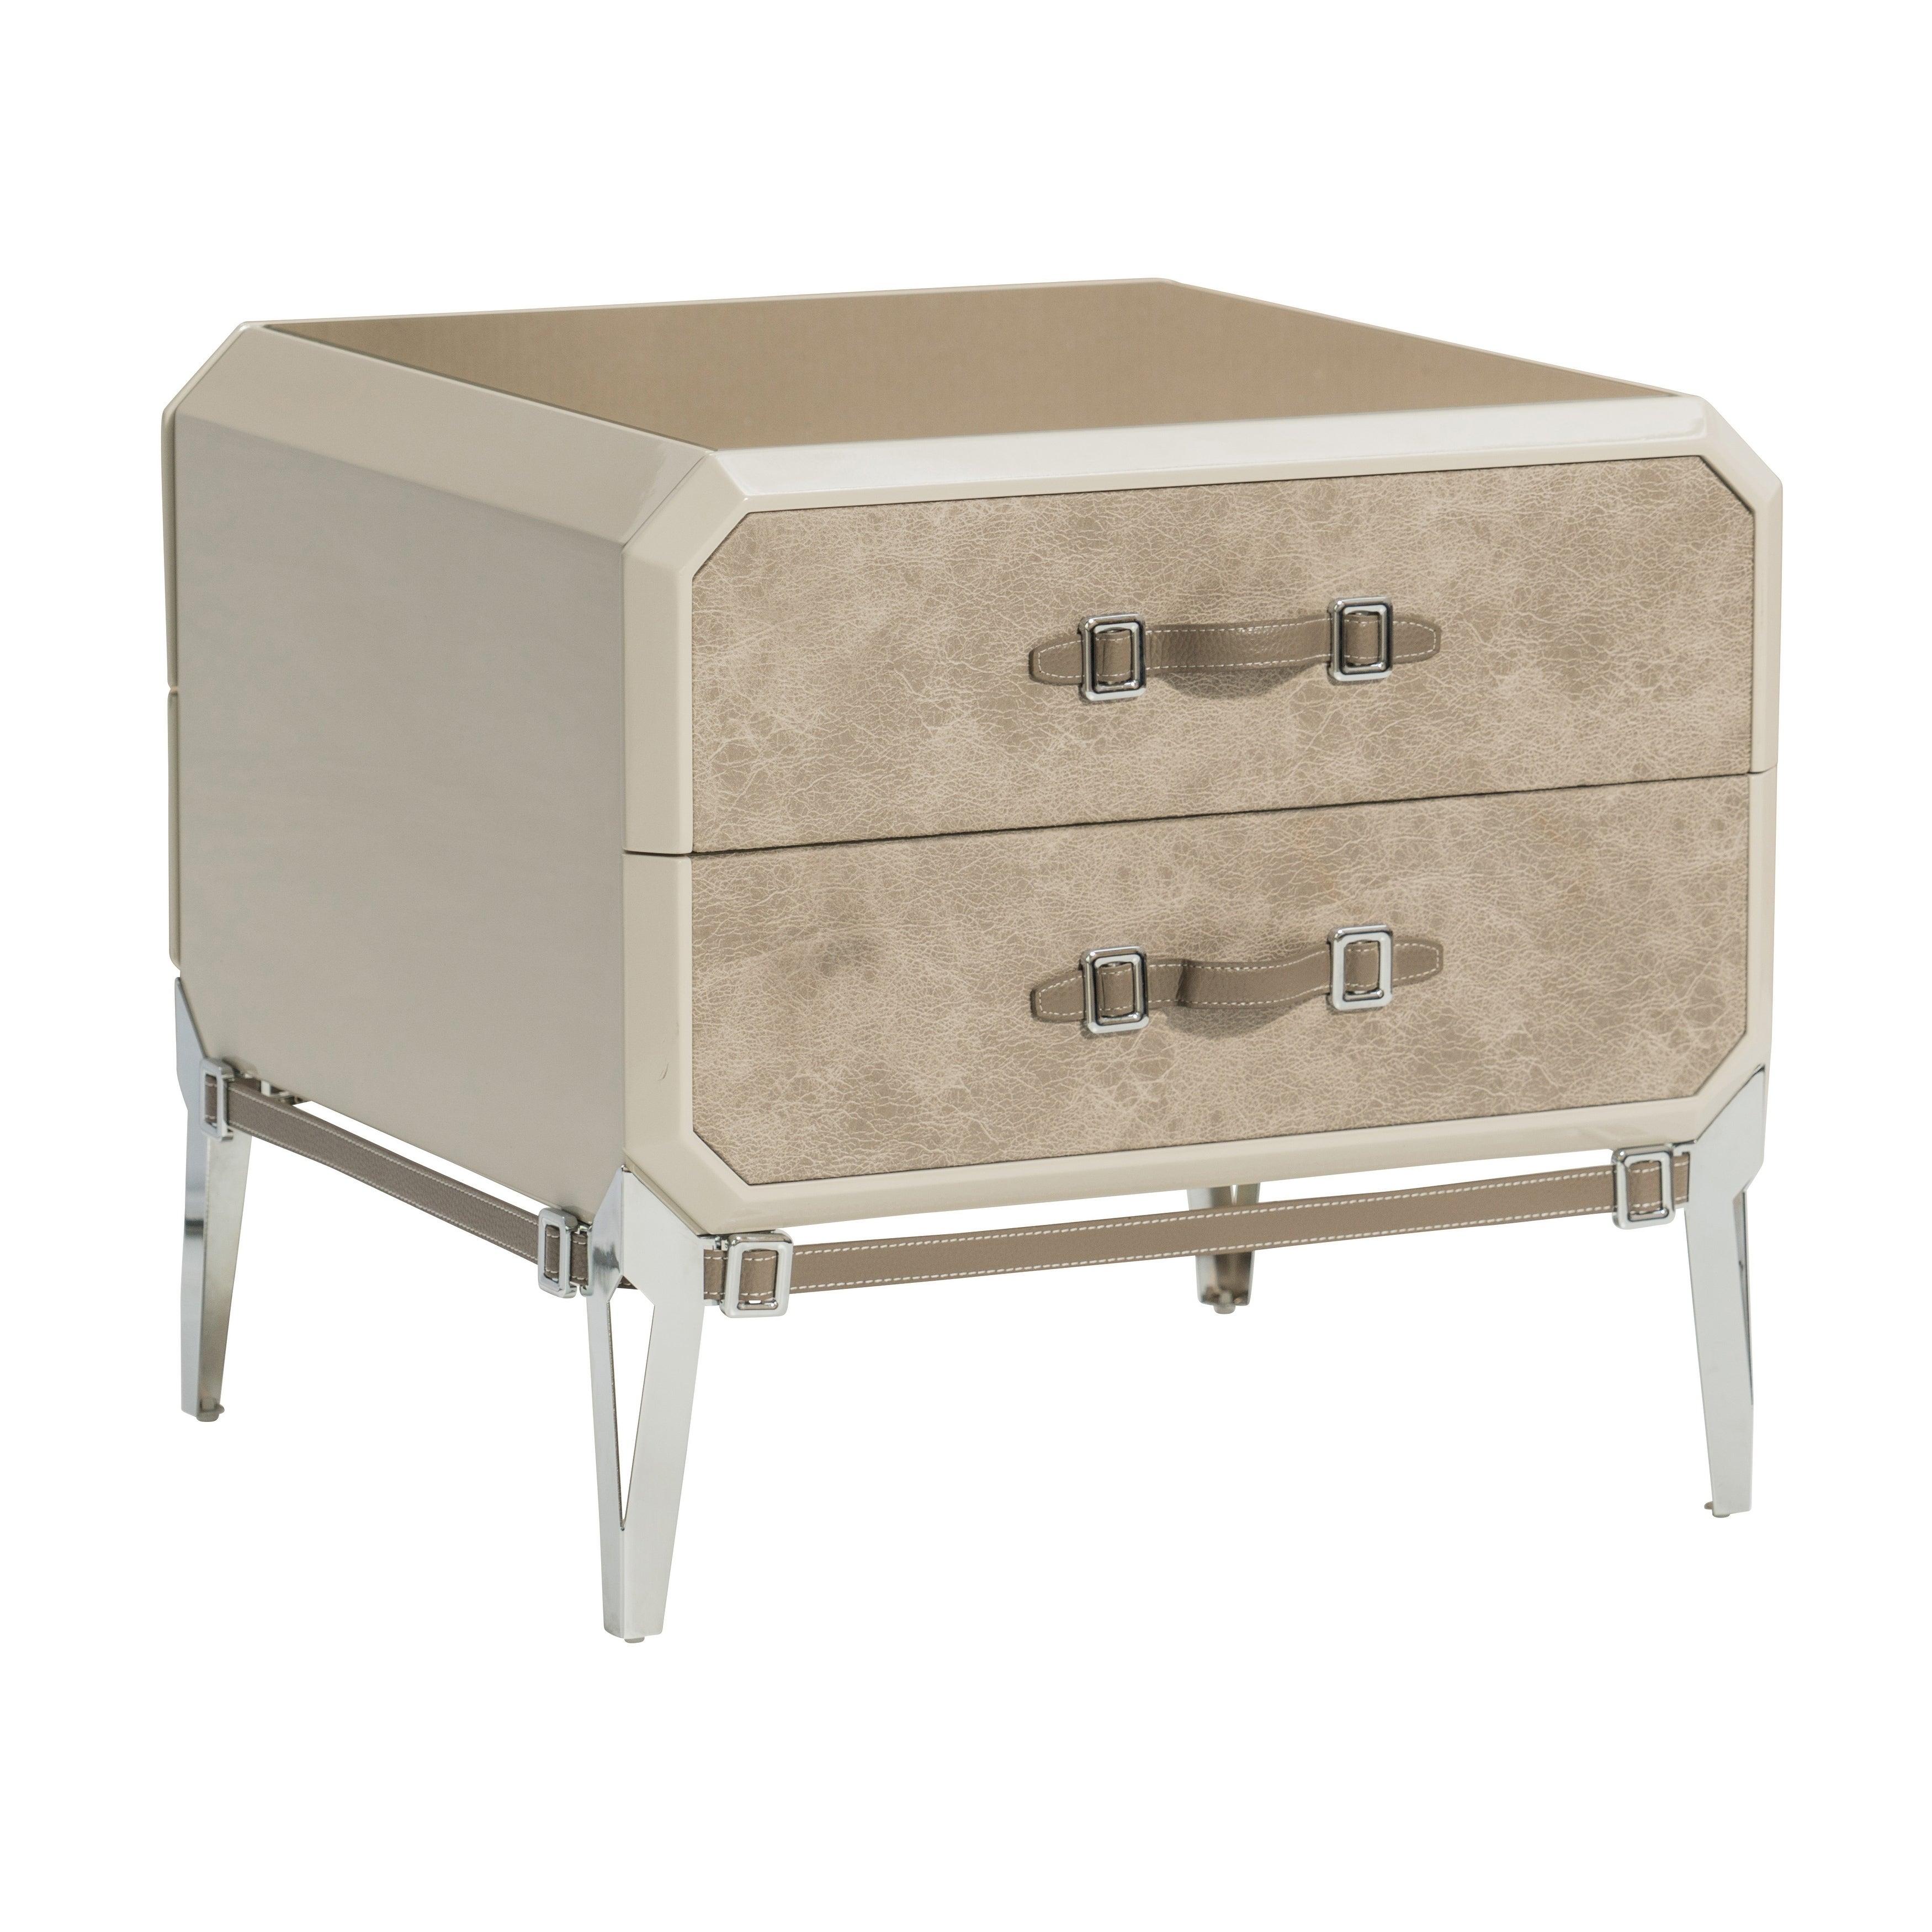 Contemporary, Modern Night Stand Kordal Kordal-27203 in Beige Leatherette